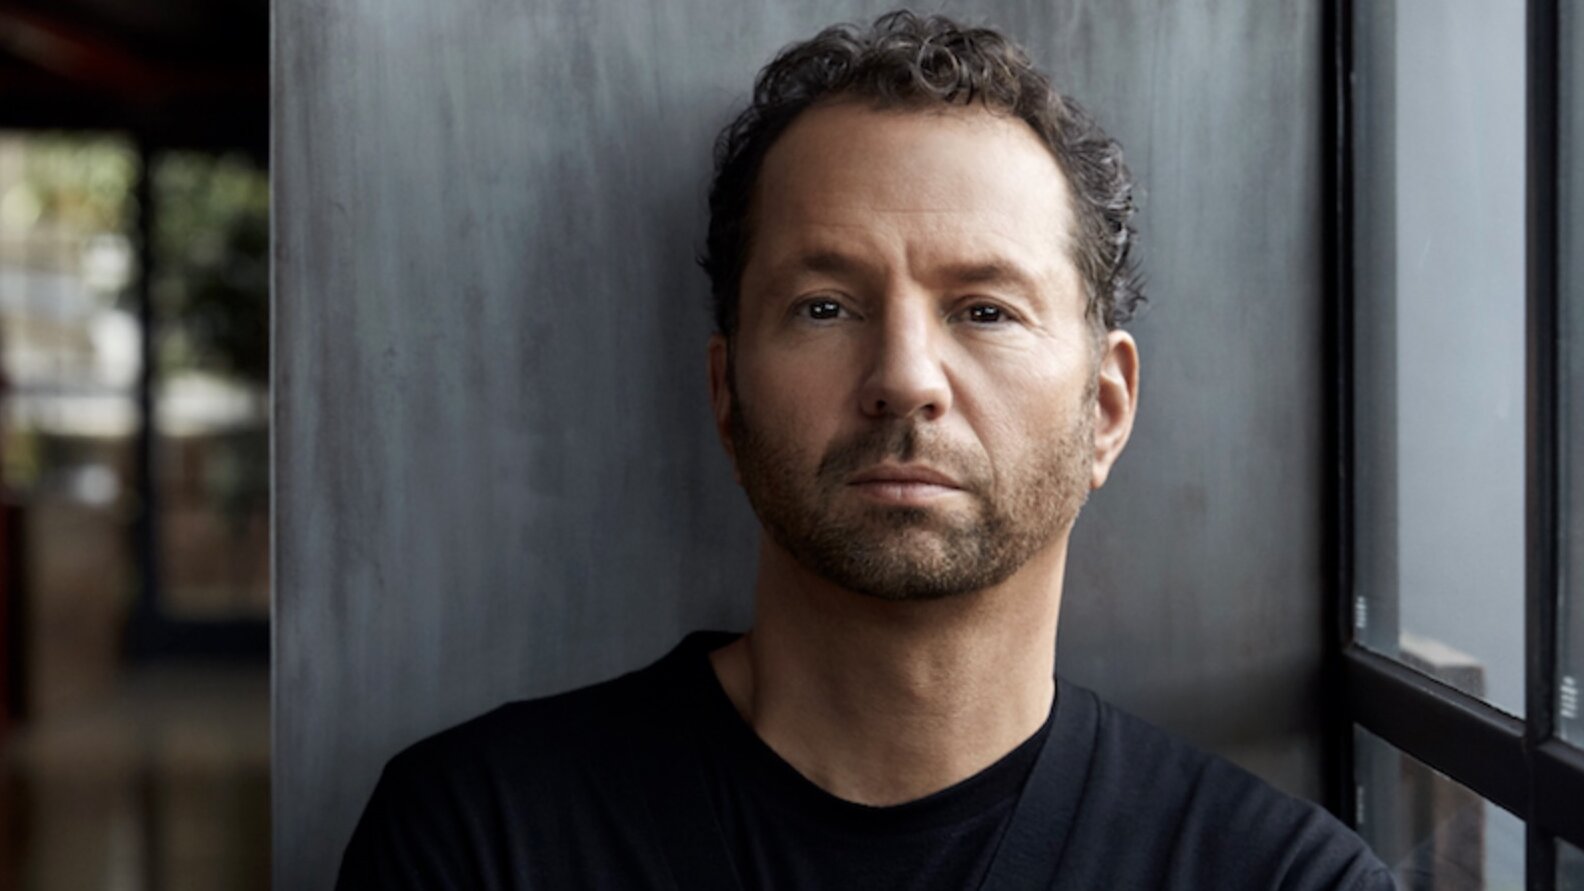 ‘The two year wait for artists and fans is over,’ says Live Nation boss Michael Rapino, as firm posts $6.3bn revenues for 2021 – Music Business Worldwide